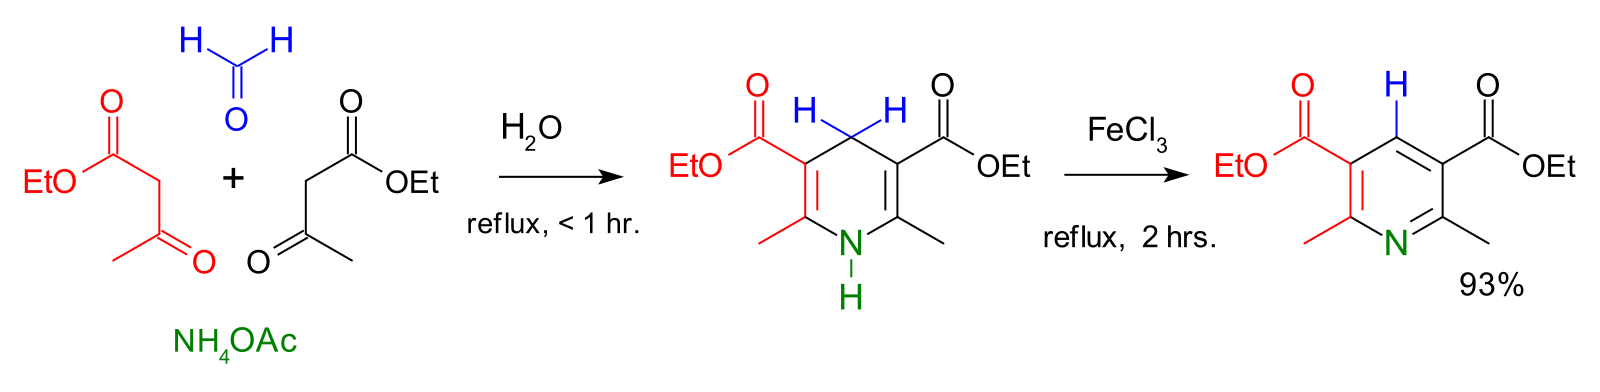 Hantzsch pyridine synthesis with acetoacetate, formaldehyde and ammonium acetate, and iron(III) chloride as the oxidizer.